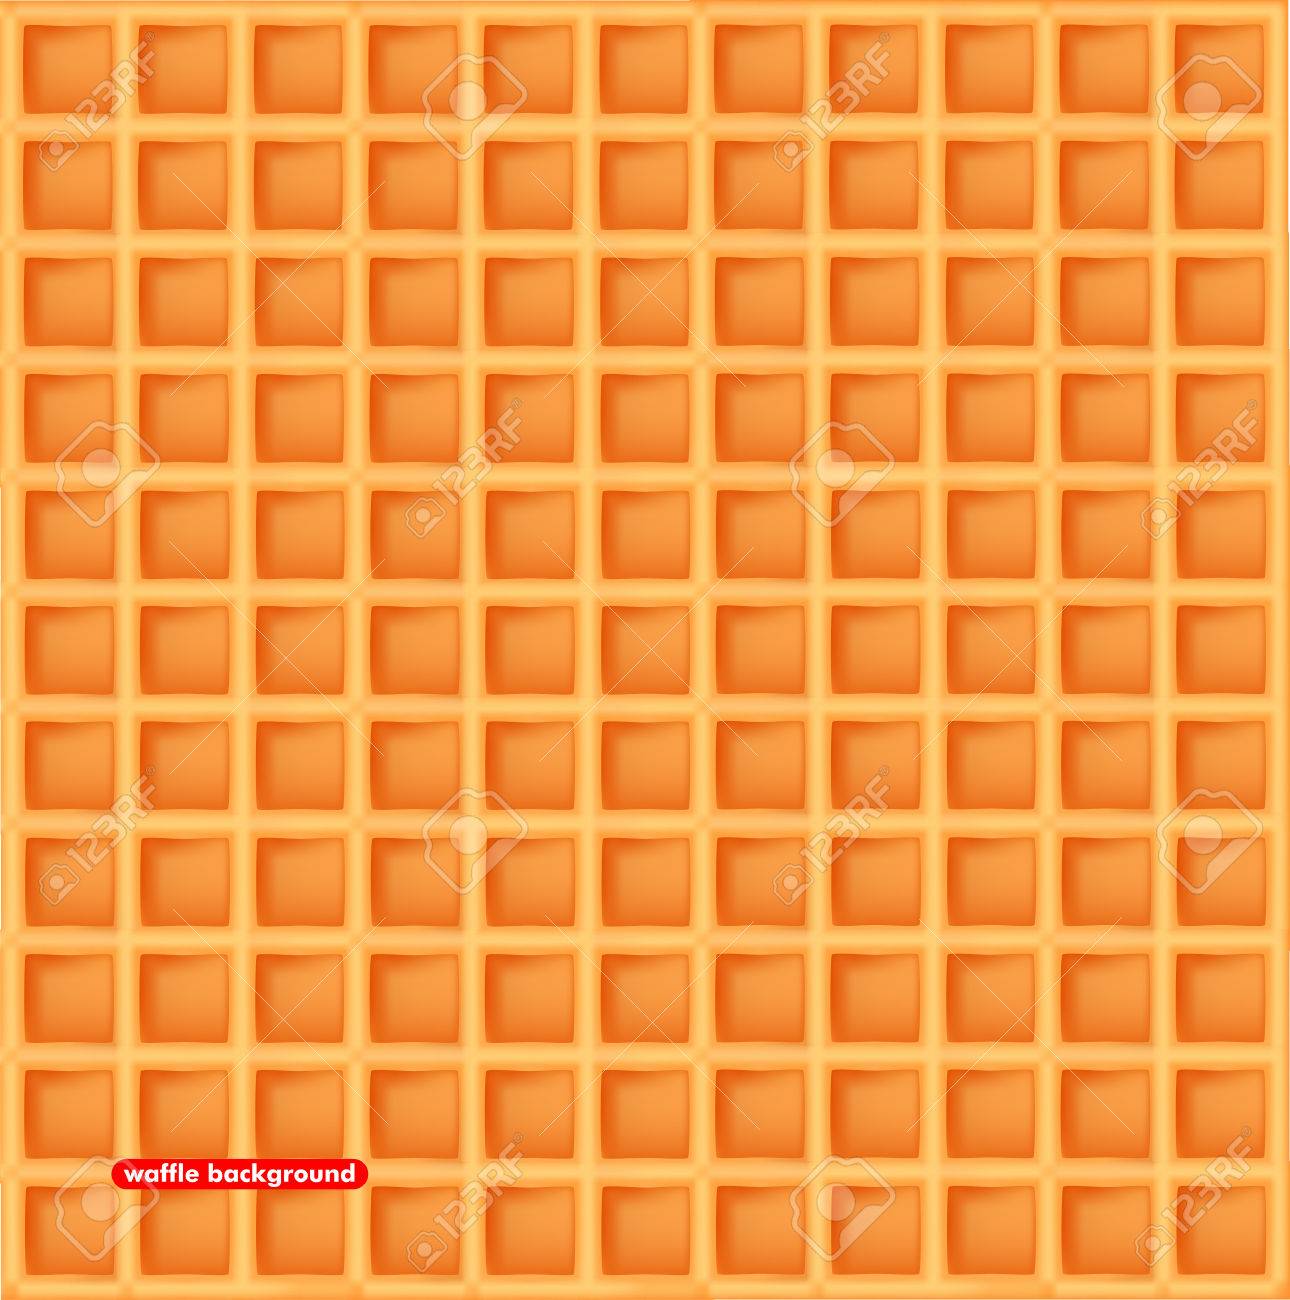 Vector Illustration Sweet Waffle Background The Texture Wafer